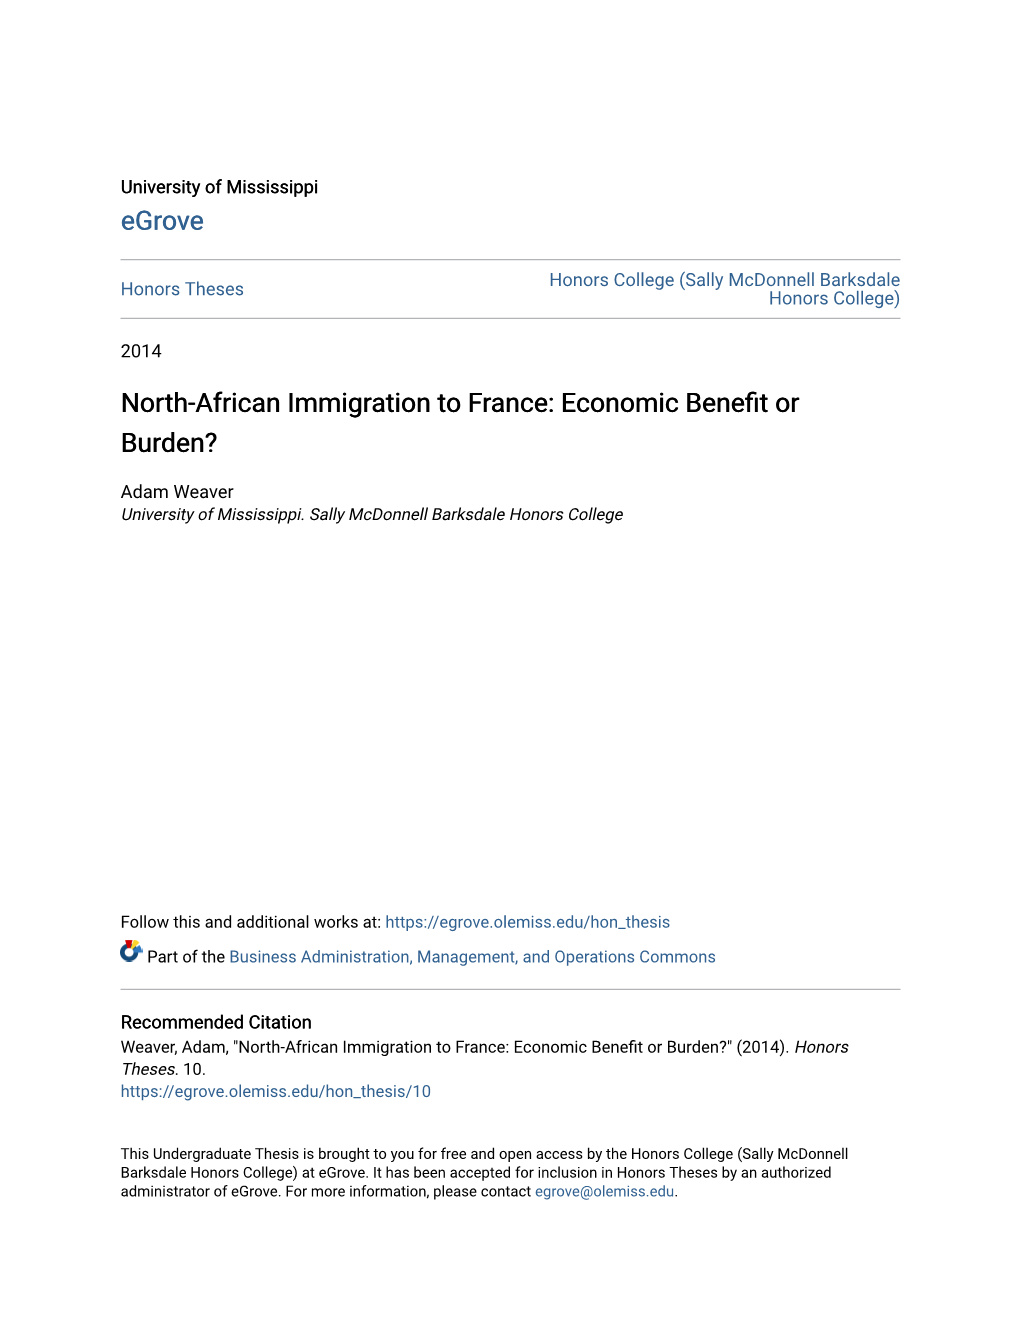 North-African Immigration to France: Economic Benefit Or Burden?